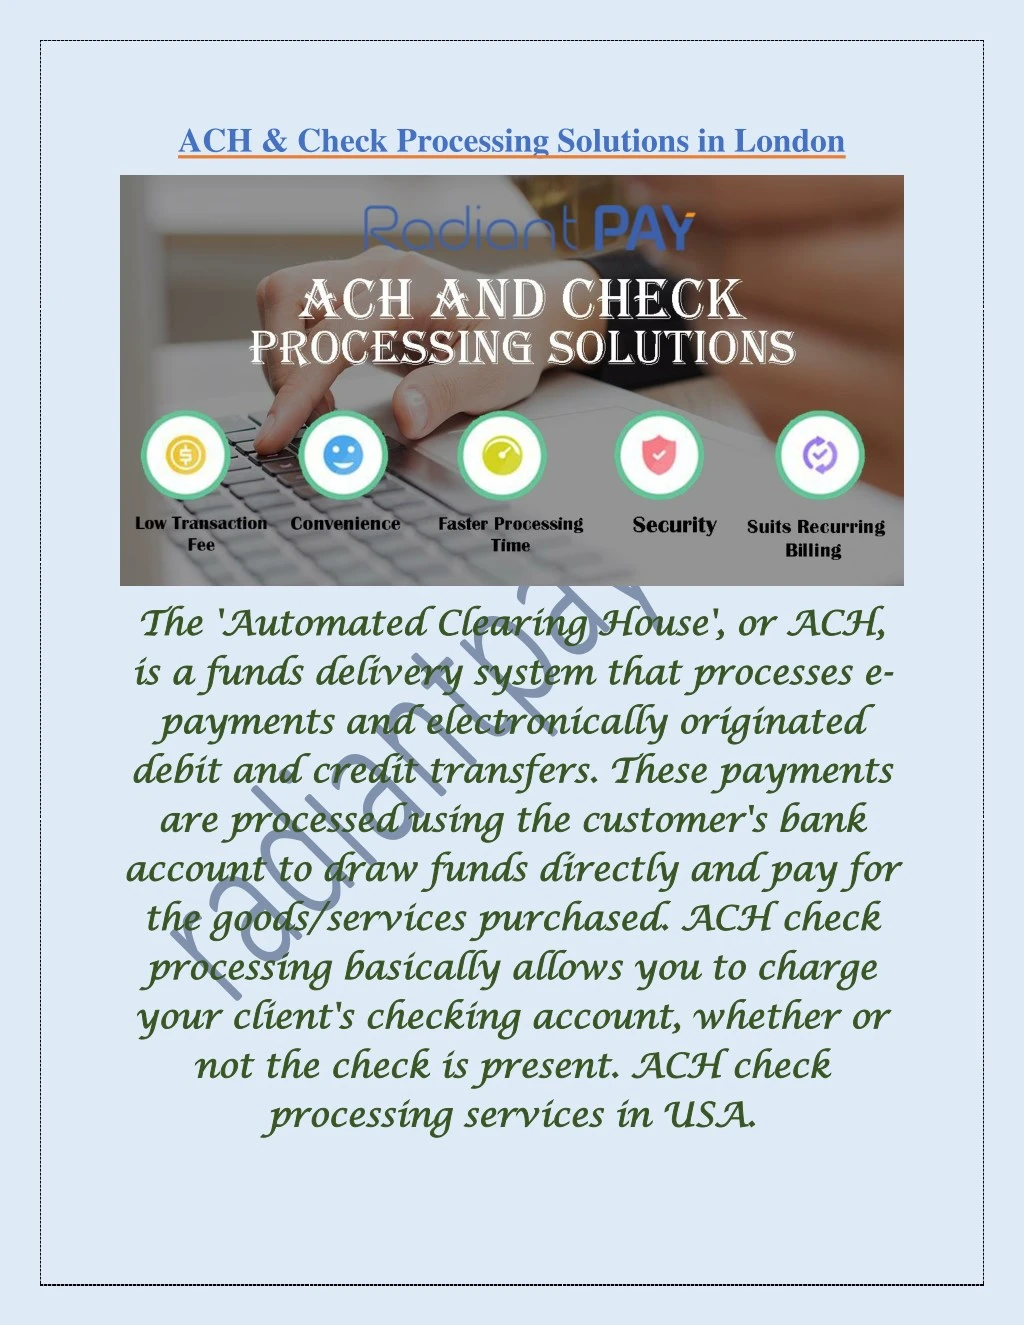 ach check processing solutions in london